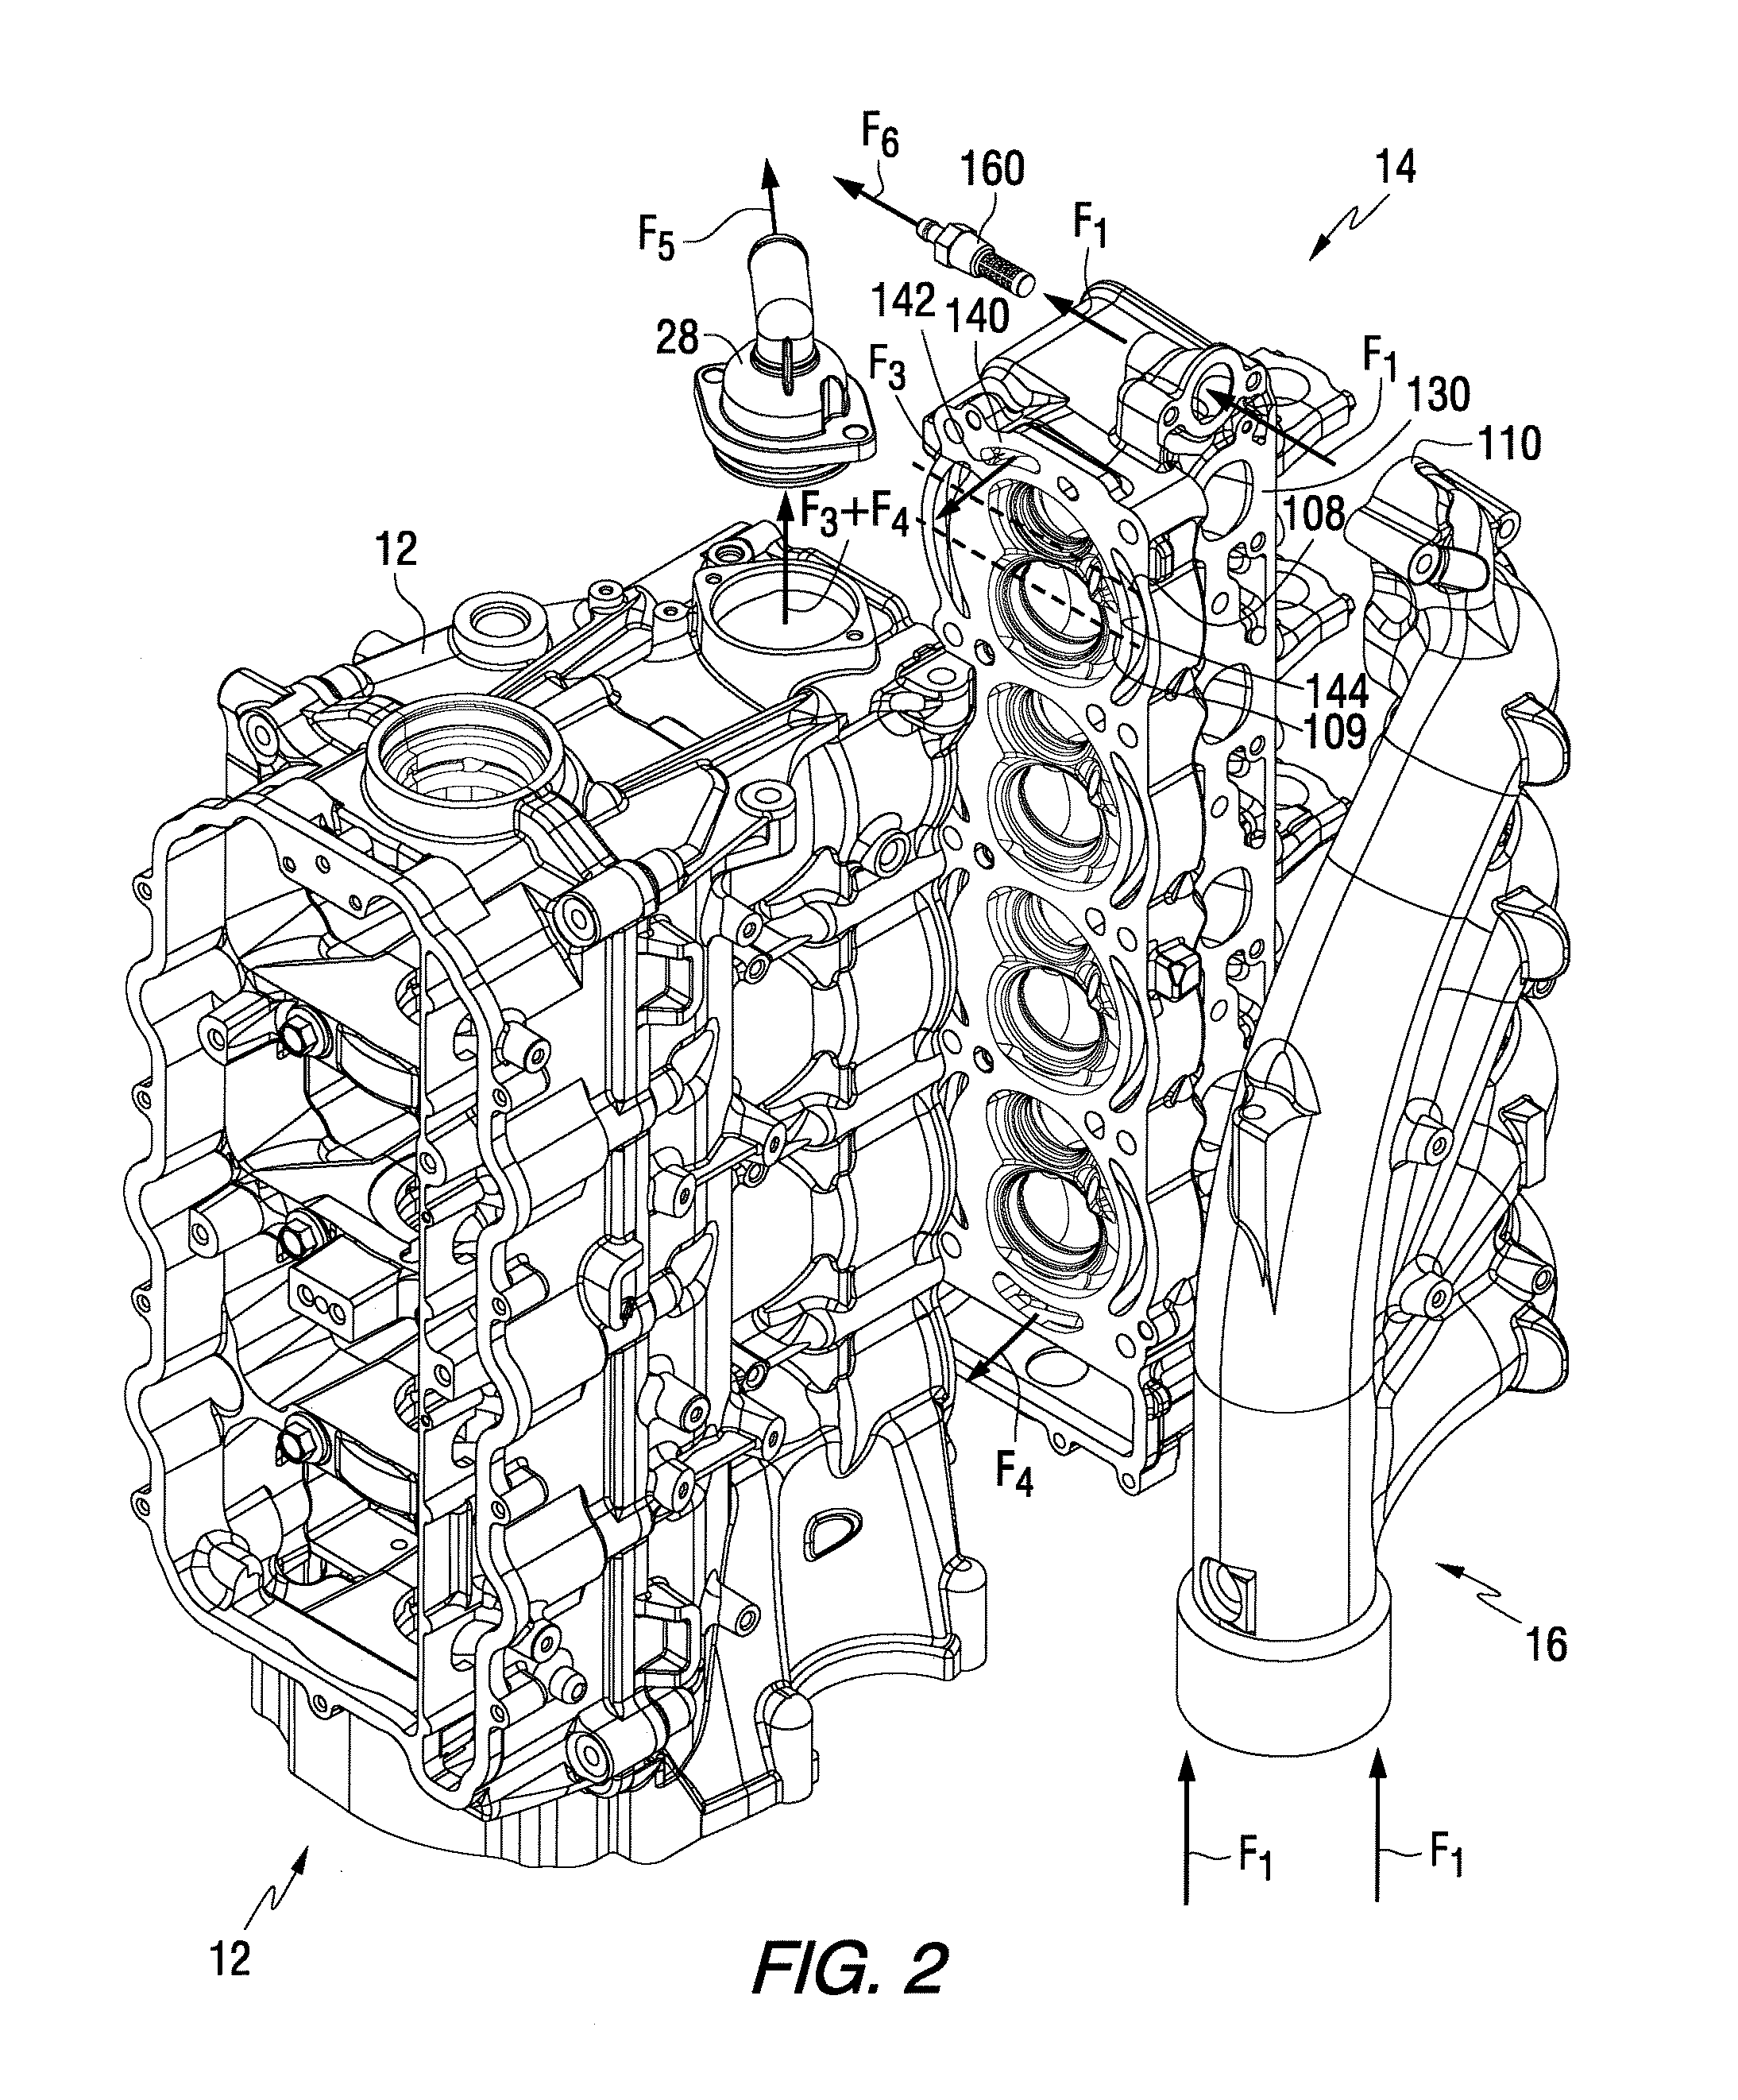 Method for cooling a four stroke marine engine with multiple path coolant flow through its cylinder head